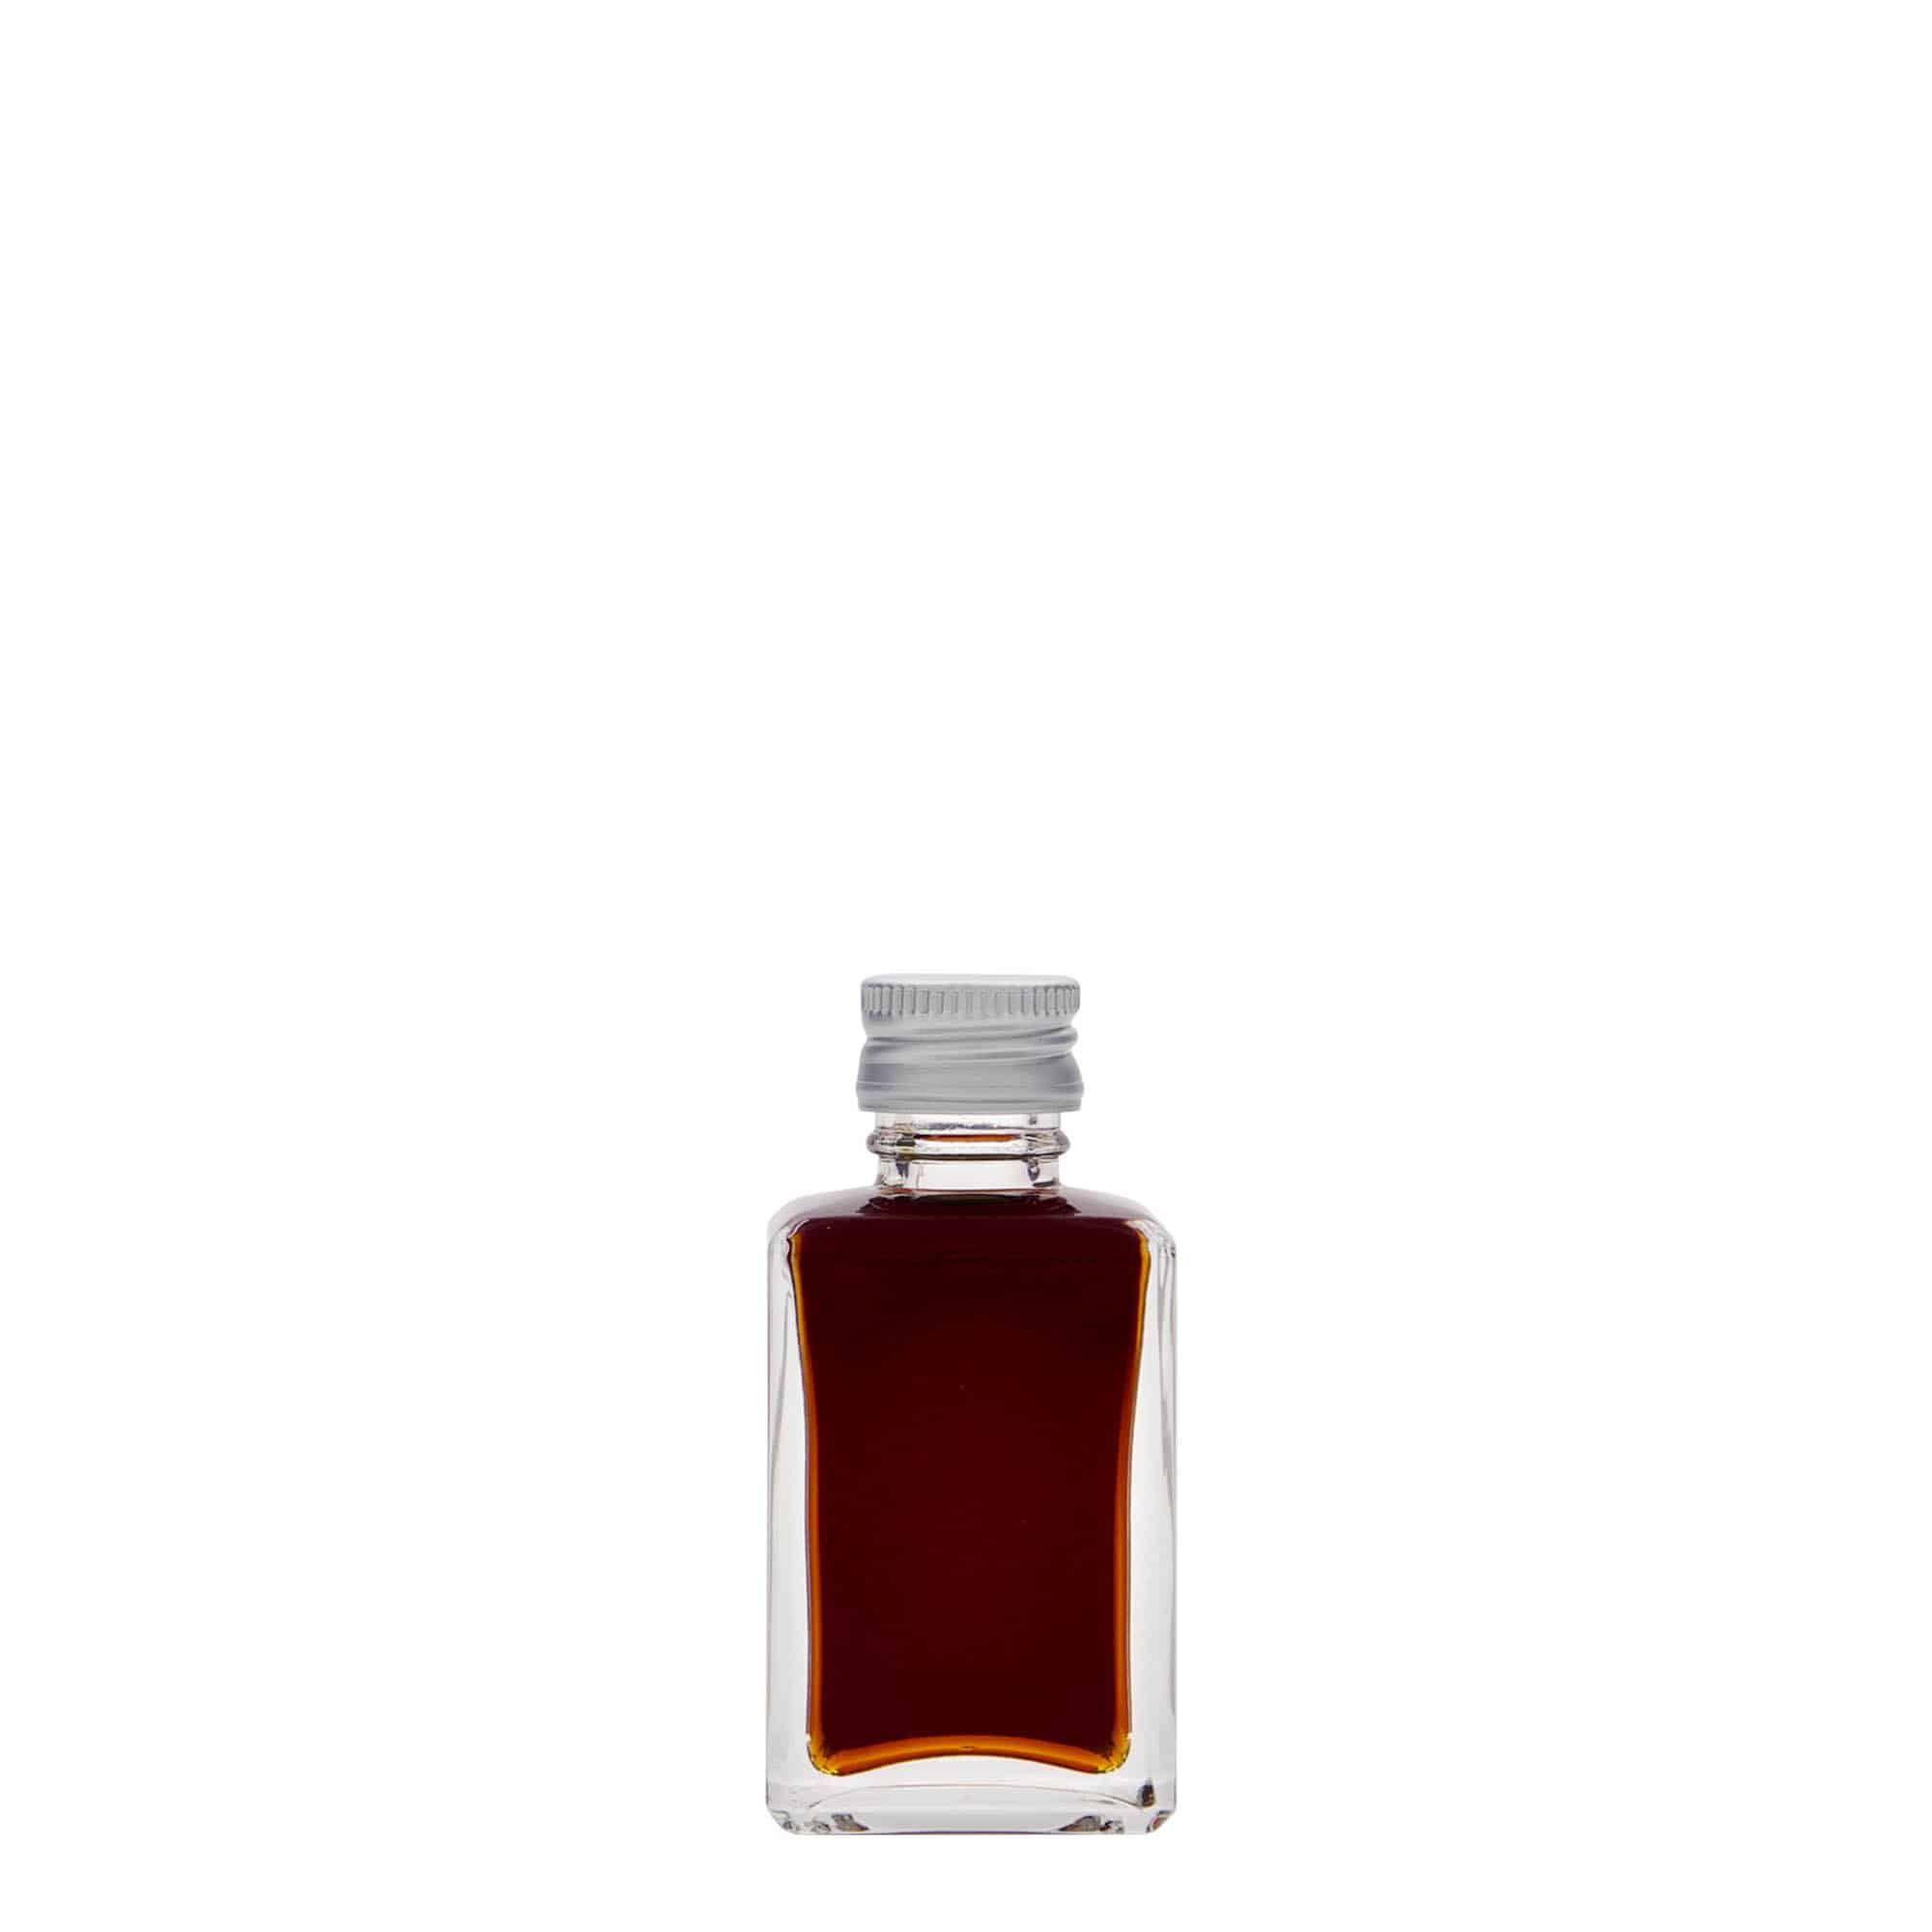 30 ml glass bottle 'Tamme', square, closure: PP 18